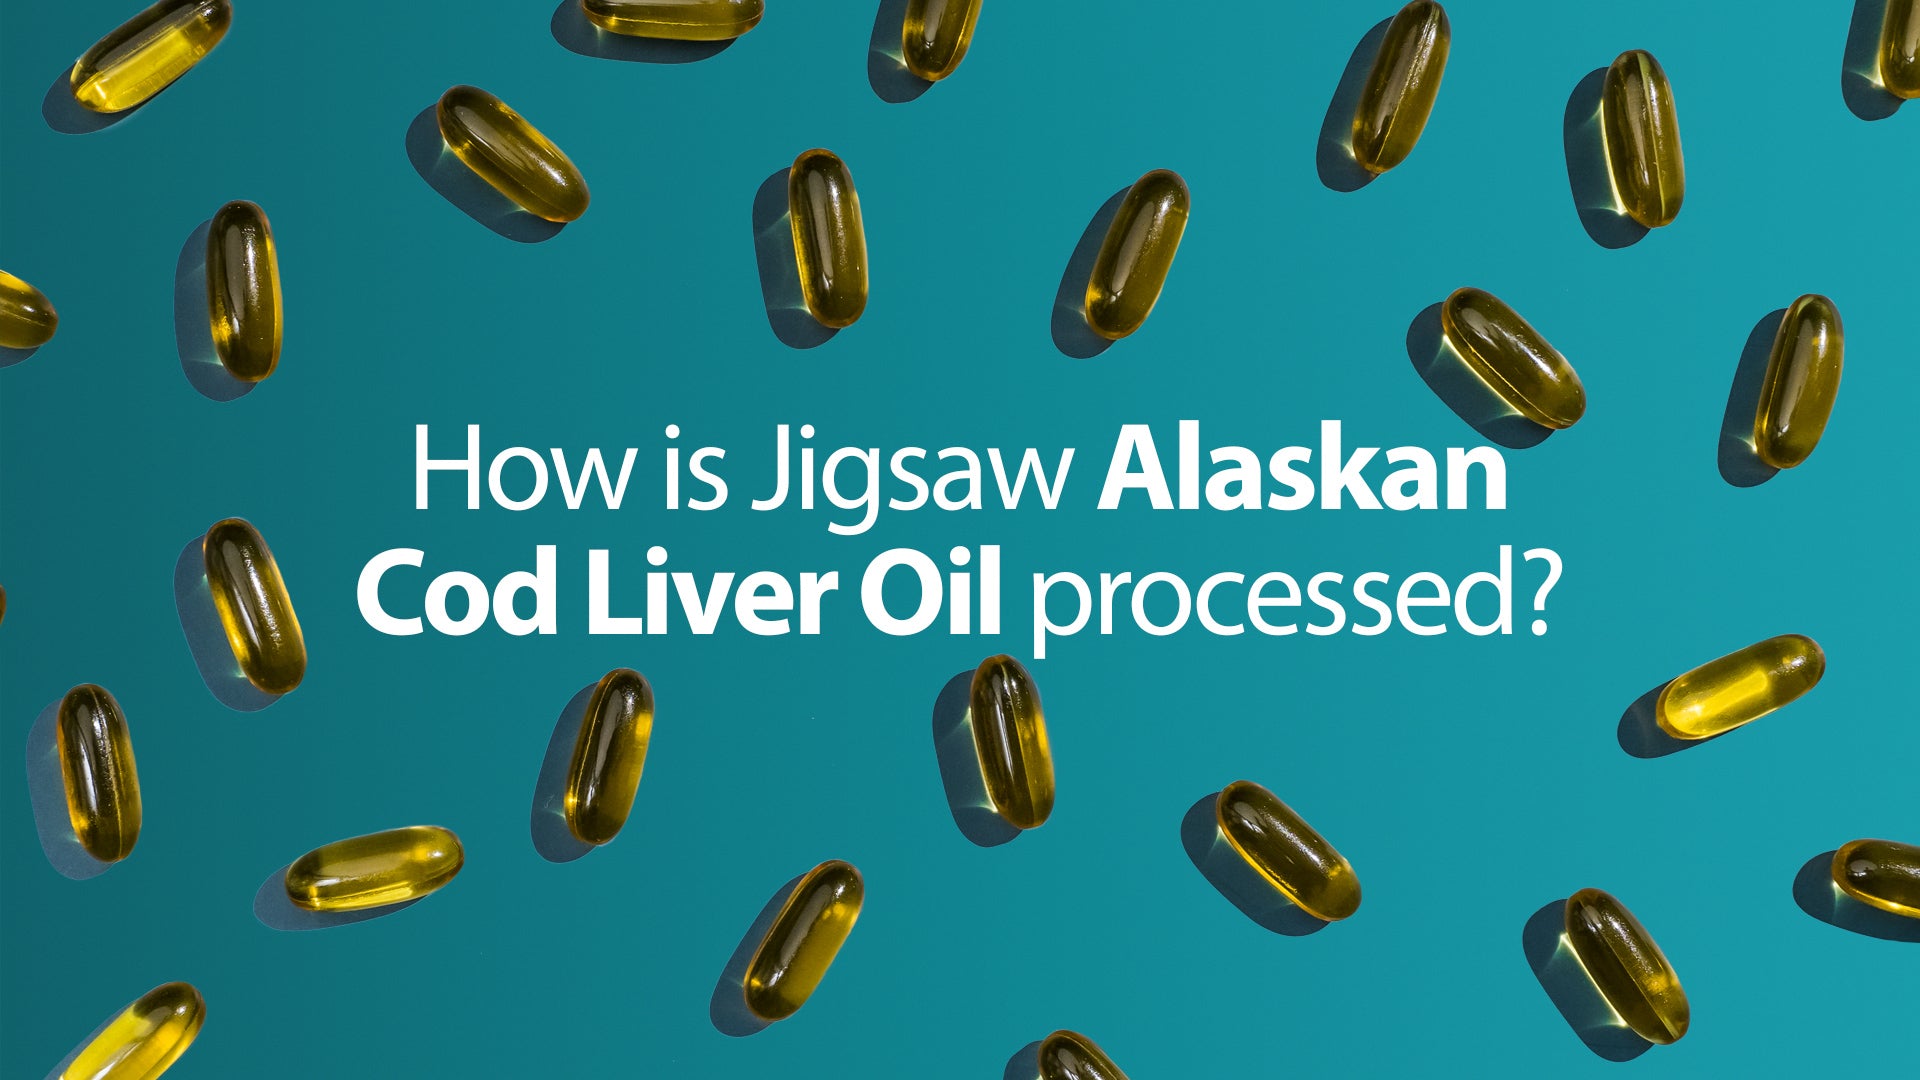 How is Jigsaw Alaskan Cod Liver Oil processed?